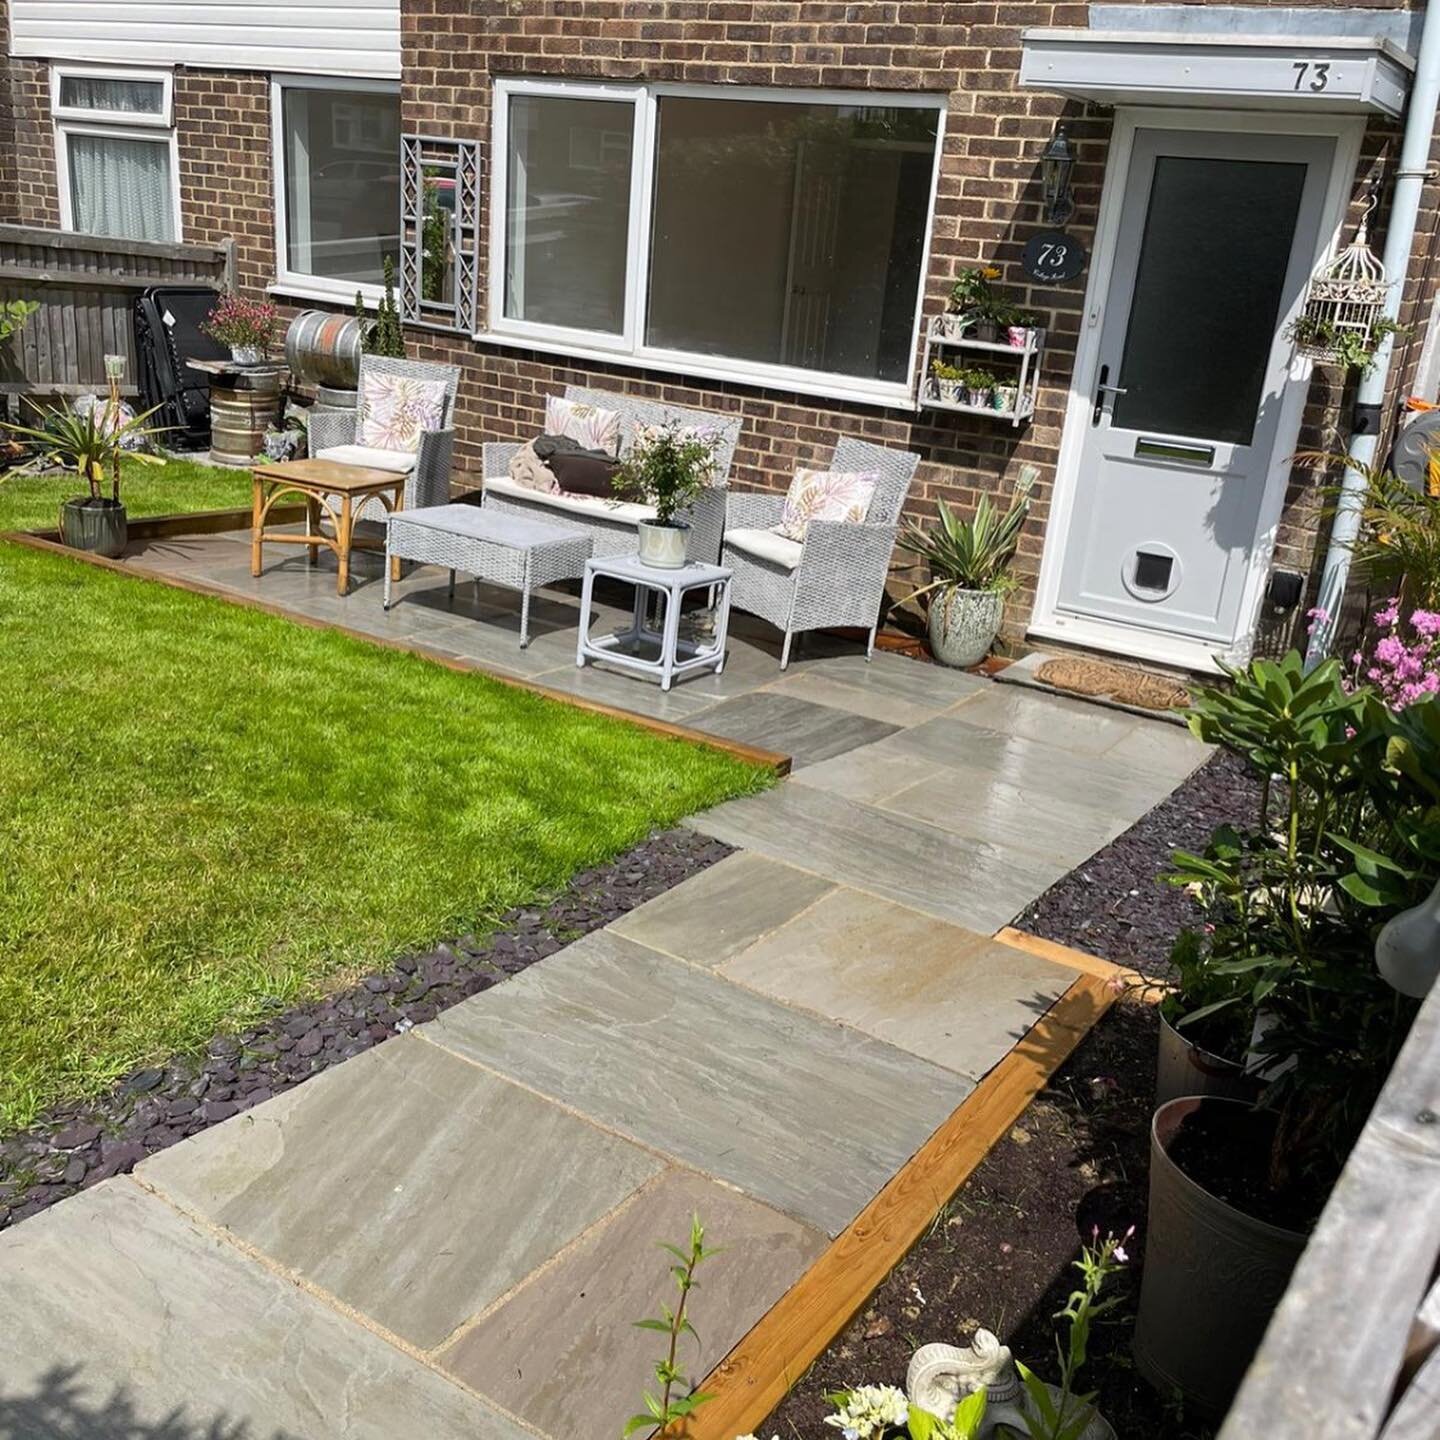 Another fantastic transformation to this garden. Just a few changes can make a tremendous difference to a usable space for outdoor living. Is your garden summer ready? #landscape #landscaping #garden #landscapegarden #gardendesign #patio #fence #fenc